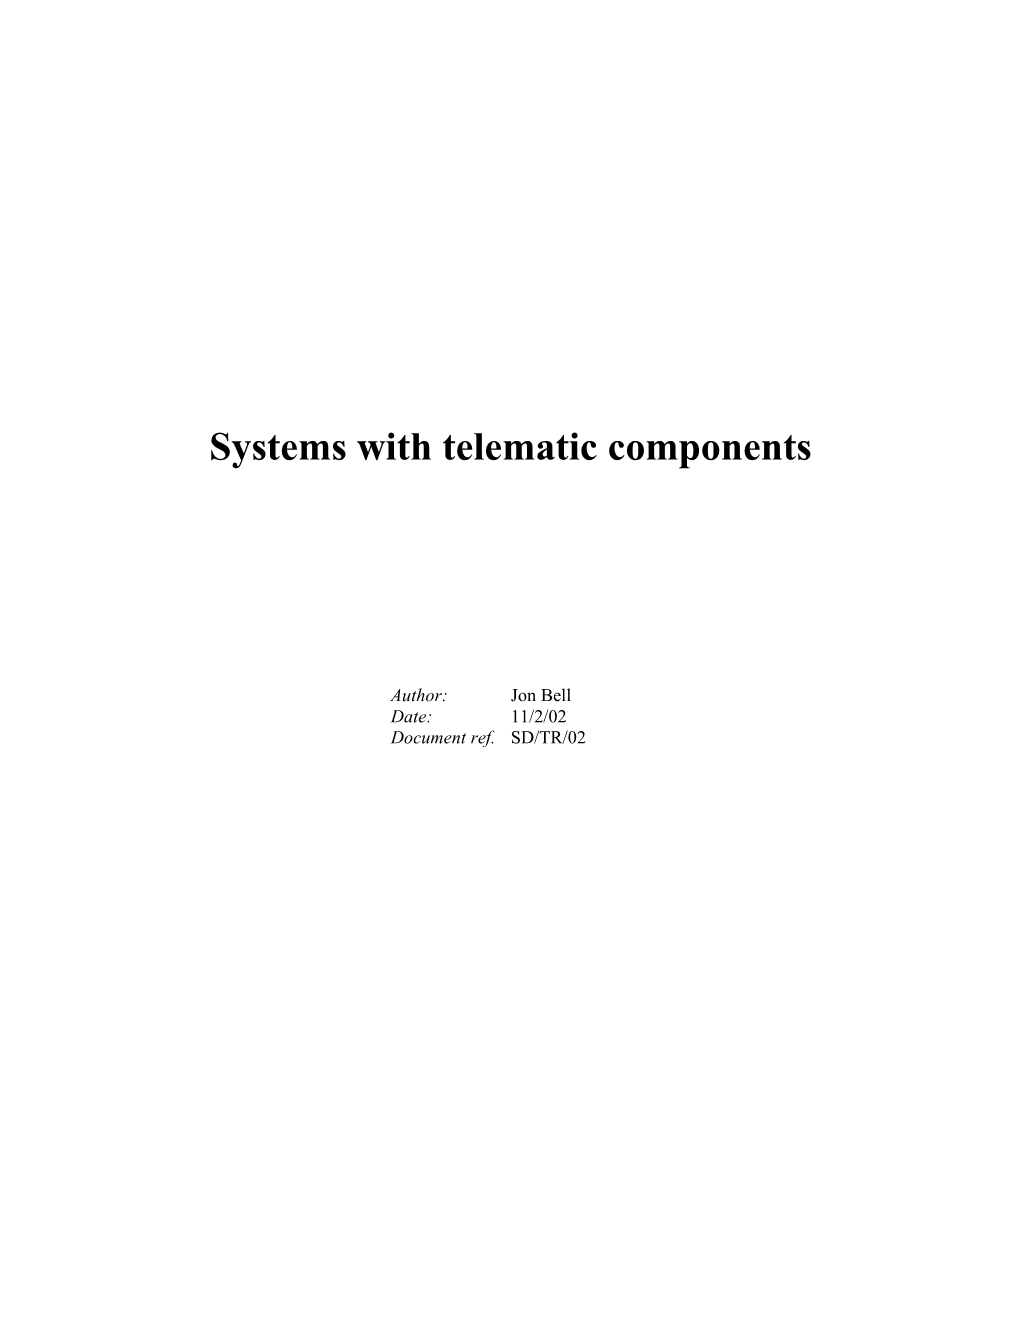 Systems with Telematic Components